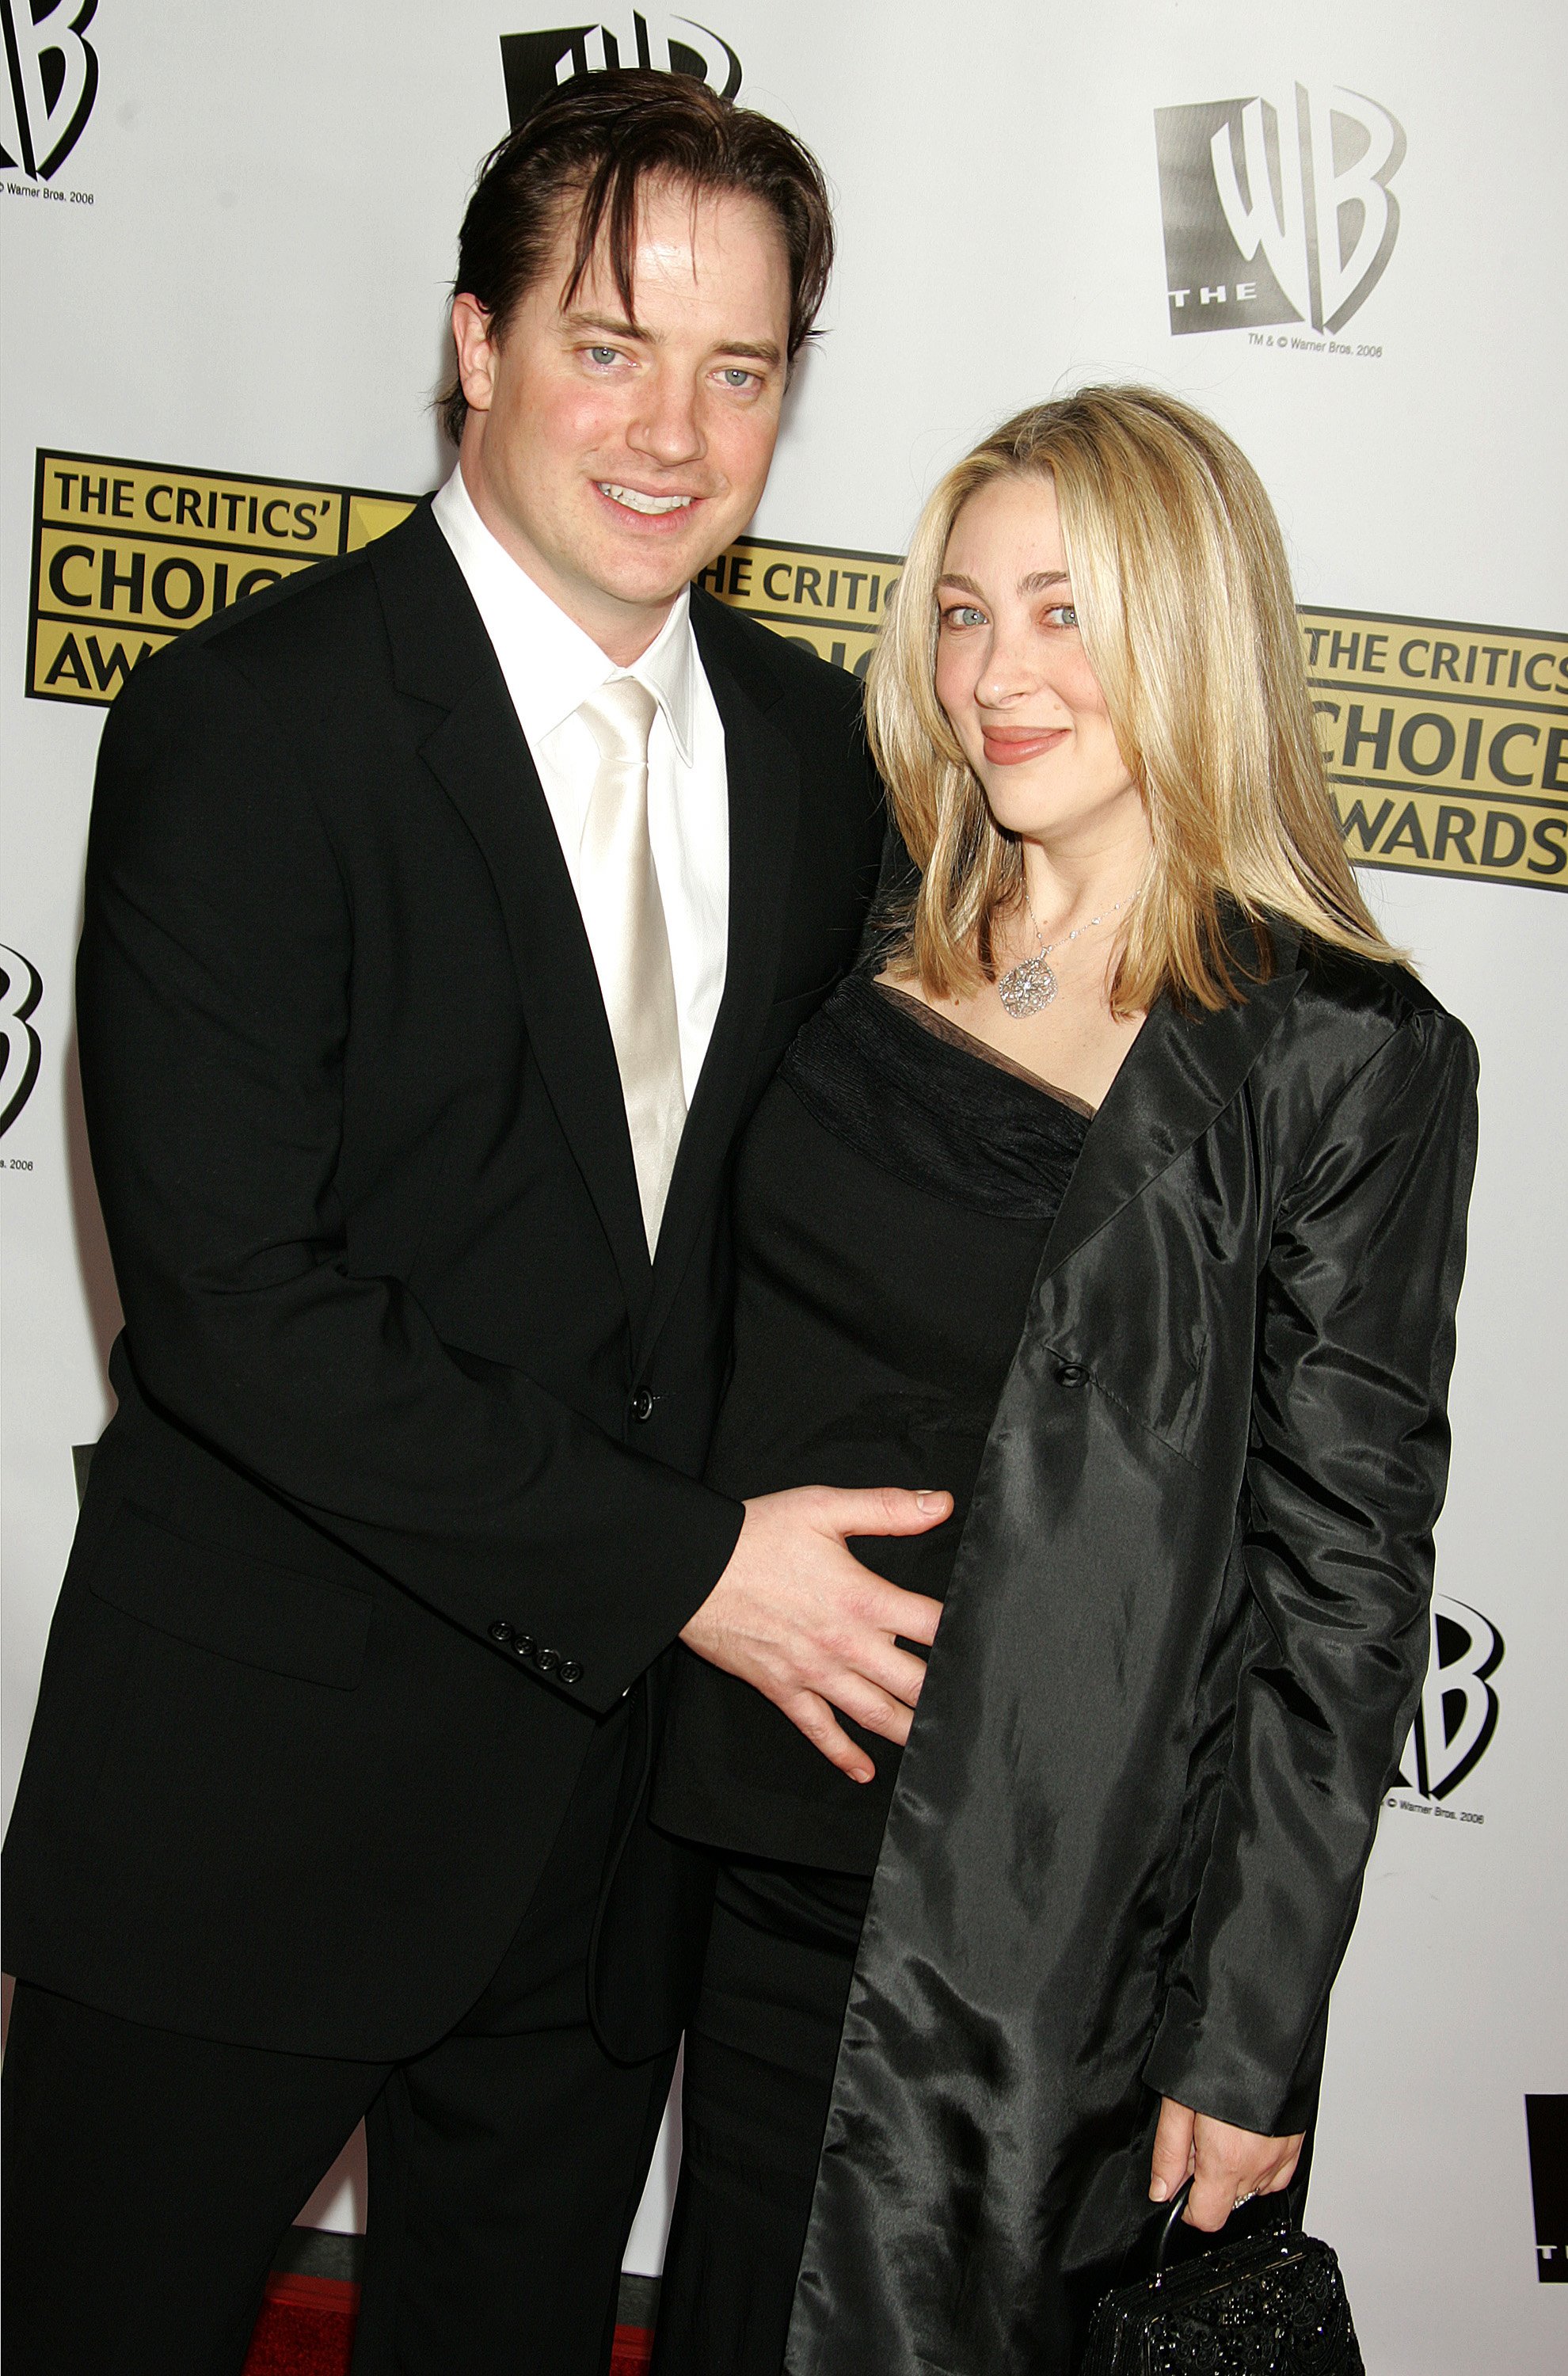 Brendan Fraser and Afton Smith during 11th Annual Critics' Choice Awards | Photo: Getty Images